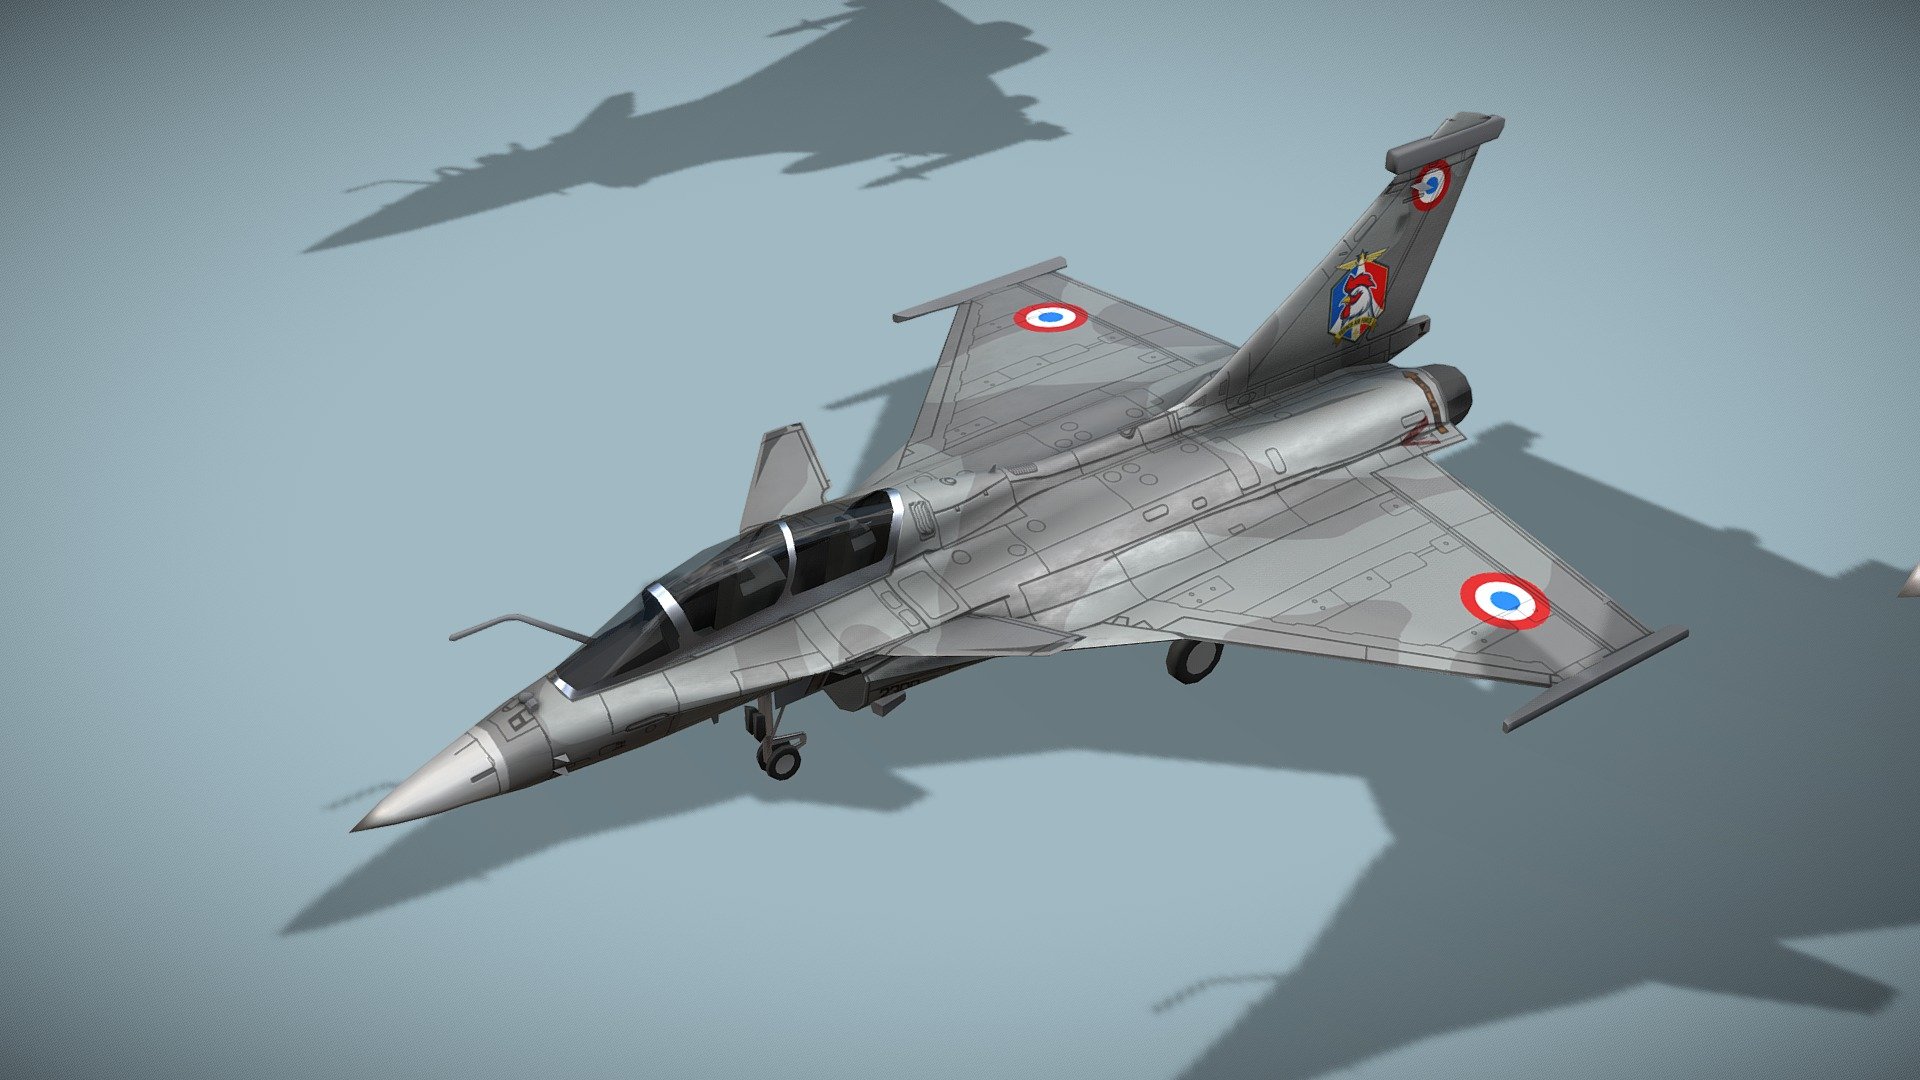 Dassault Rafale



Lowpoly model of French modern fighterjet. 2 person version



The Dassault Rafale is a French twin-engine, canard delta wing, multirole fighter aircraft designed and built by Dassault Aviation. Equipped with a wide range of weapons, the Rafale is intended to perform air supremacy, interdiction, aerial reconnaissance, ground support, in-depth strike, anti-ship strike and nuclear deterrence missions. The Rafale is referred to as an &ldquo;omnirole